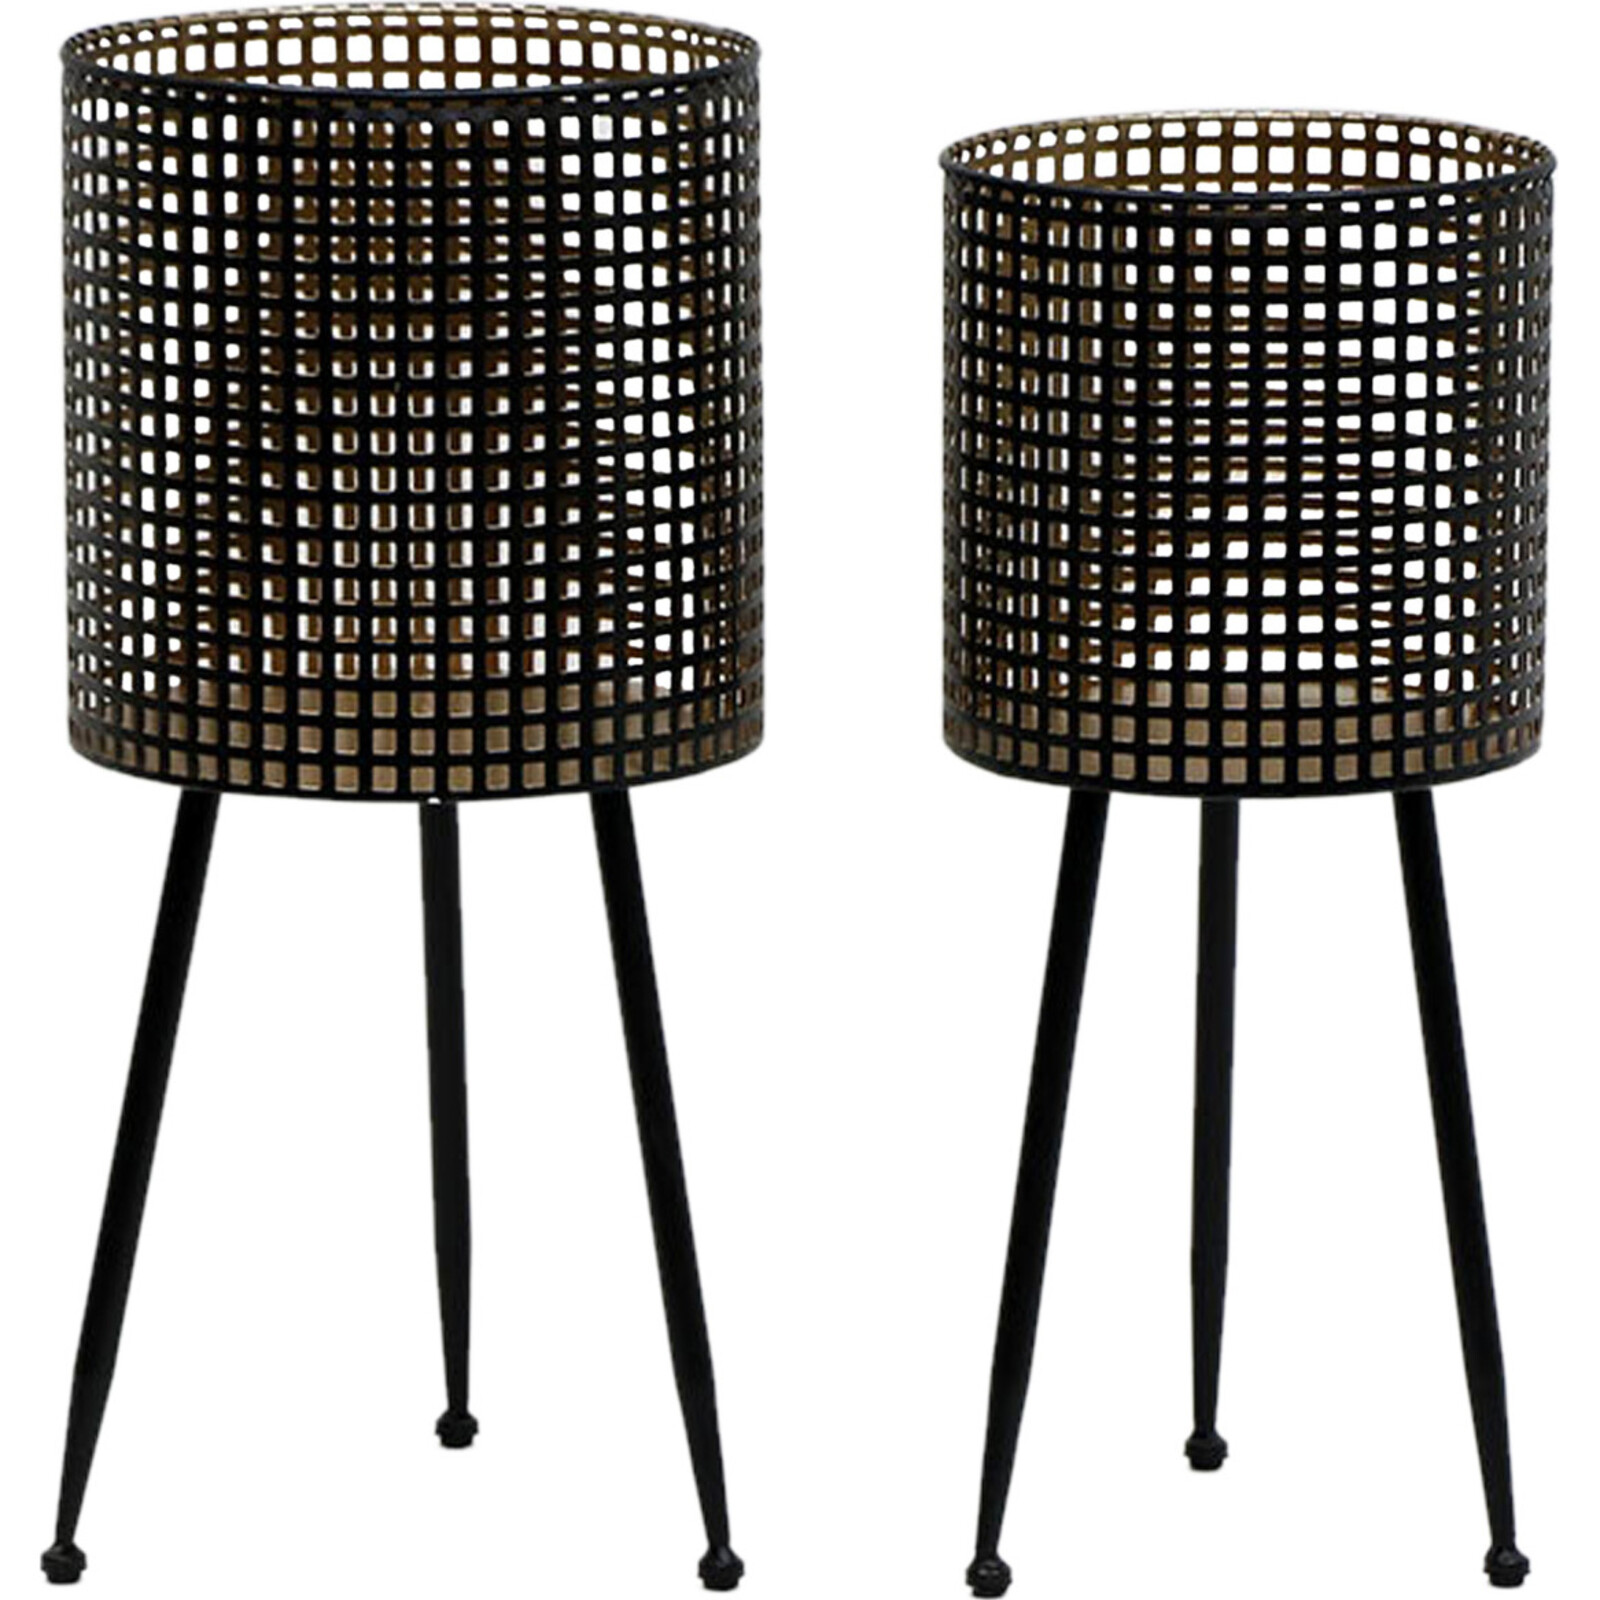 Planters Black Gold Tall S/2 